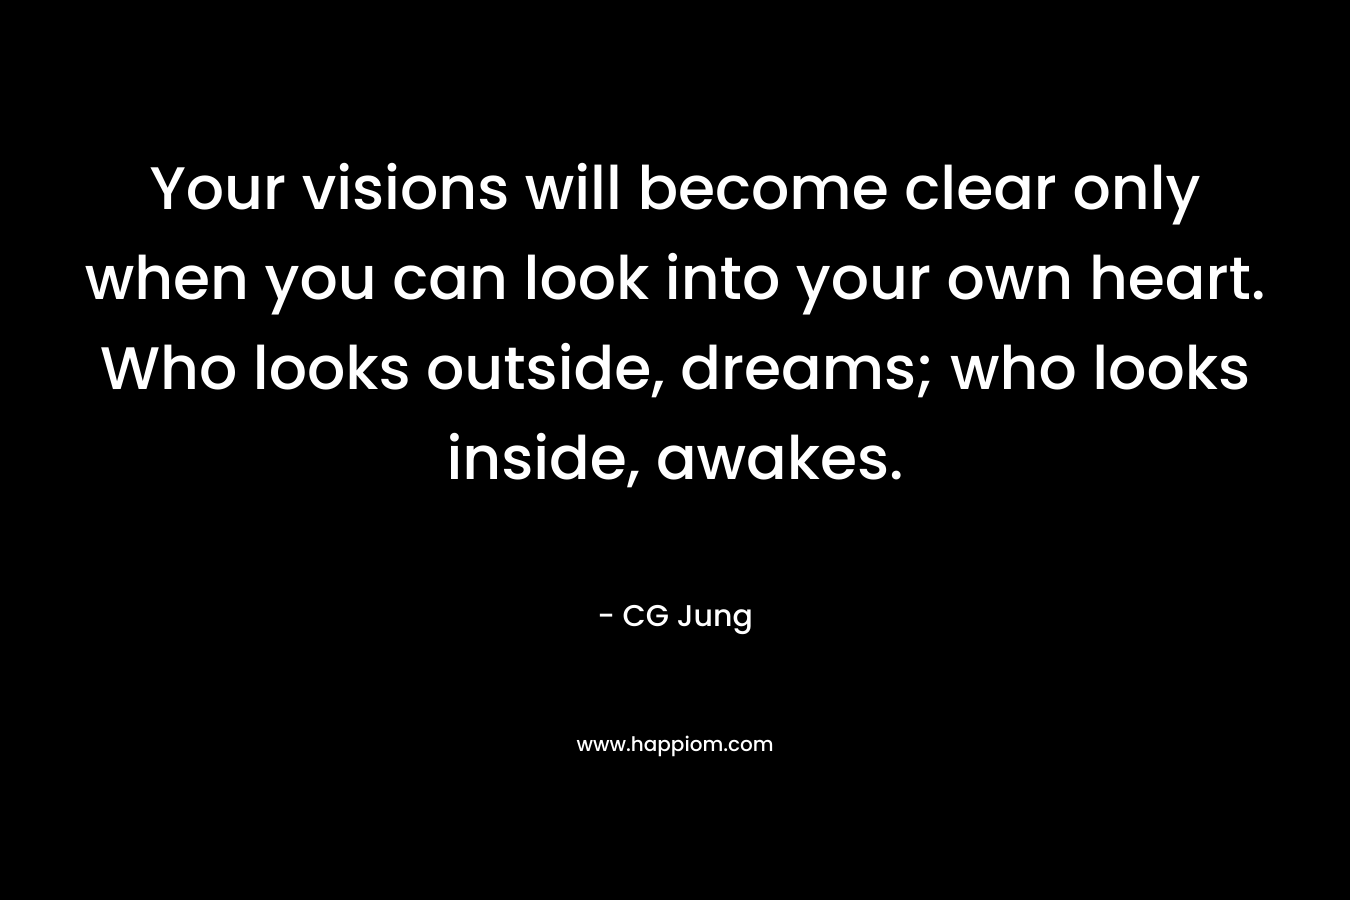 Your visions will become clear only when you can look into your own heart. Who looks outside, dreams; who looks inside, awakes.